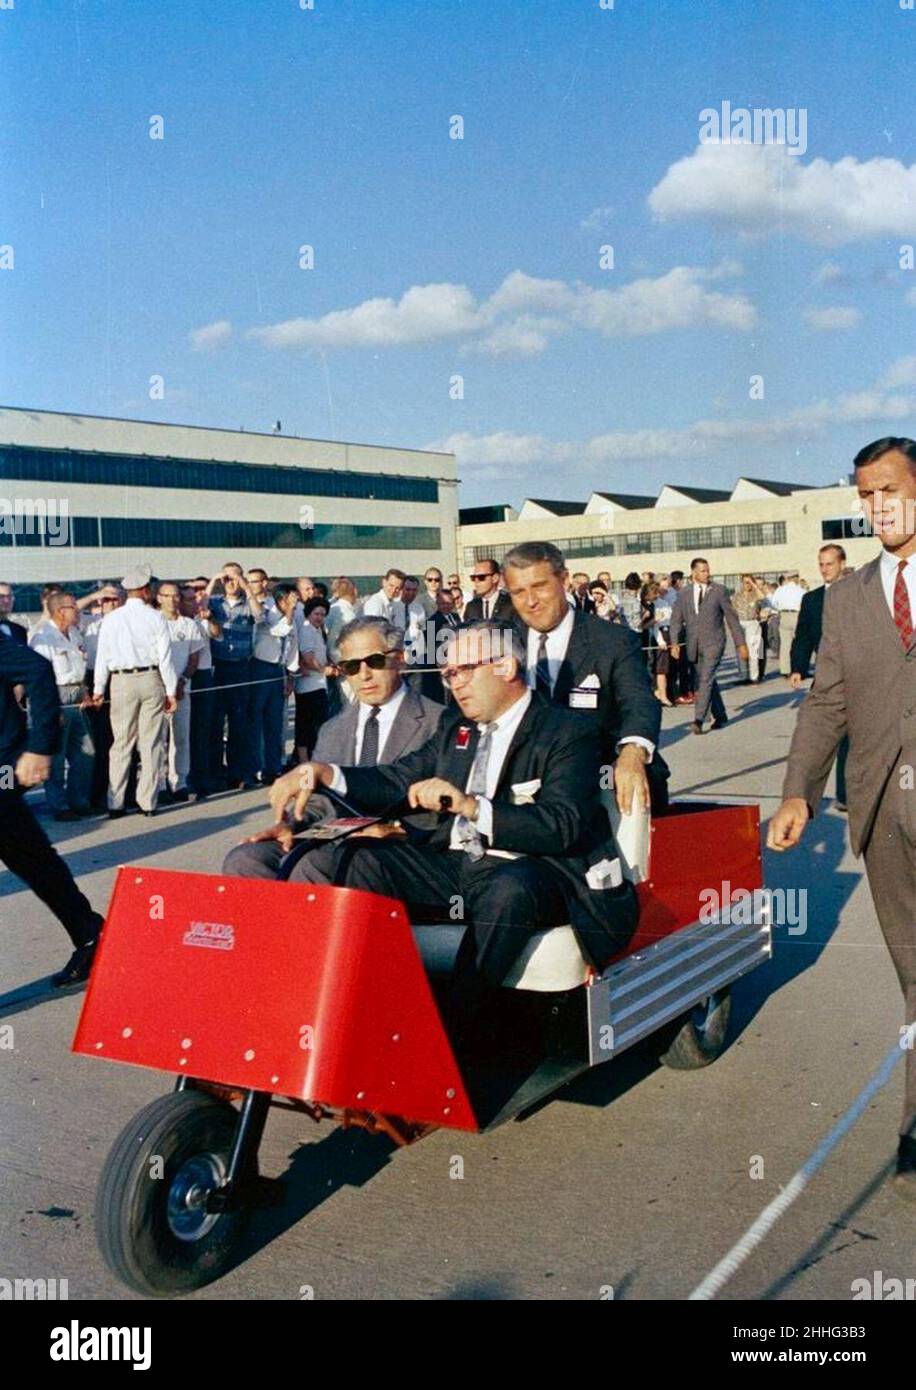 ST-C378-8-62. Director of the George C. Marshall Space Flight Center (MSFC), Dr. Wernher von Braun, at McDonnell Aircraft Corporation in St. Louis, Missouri. Stock Photo